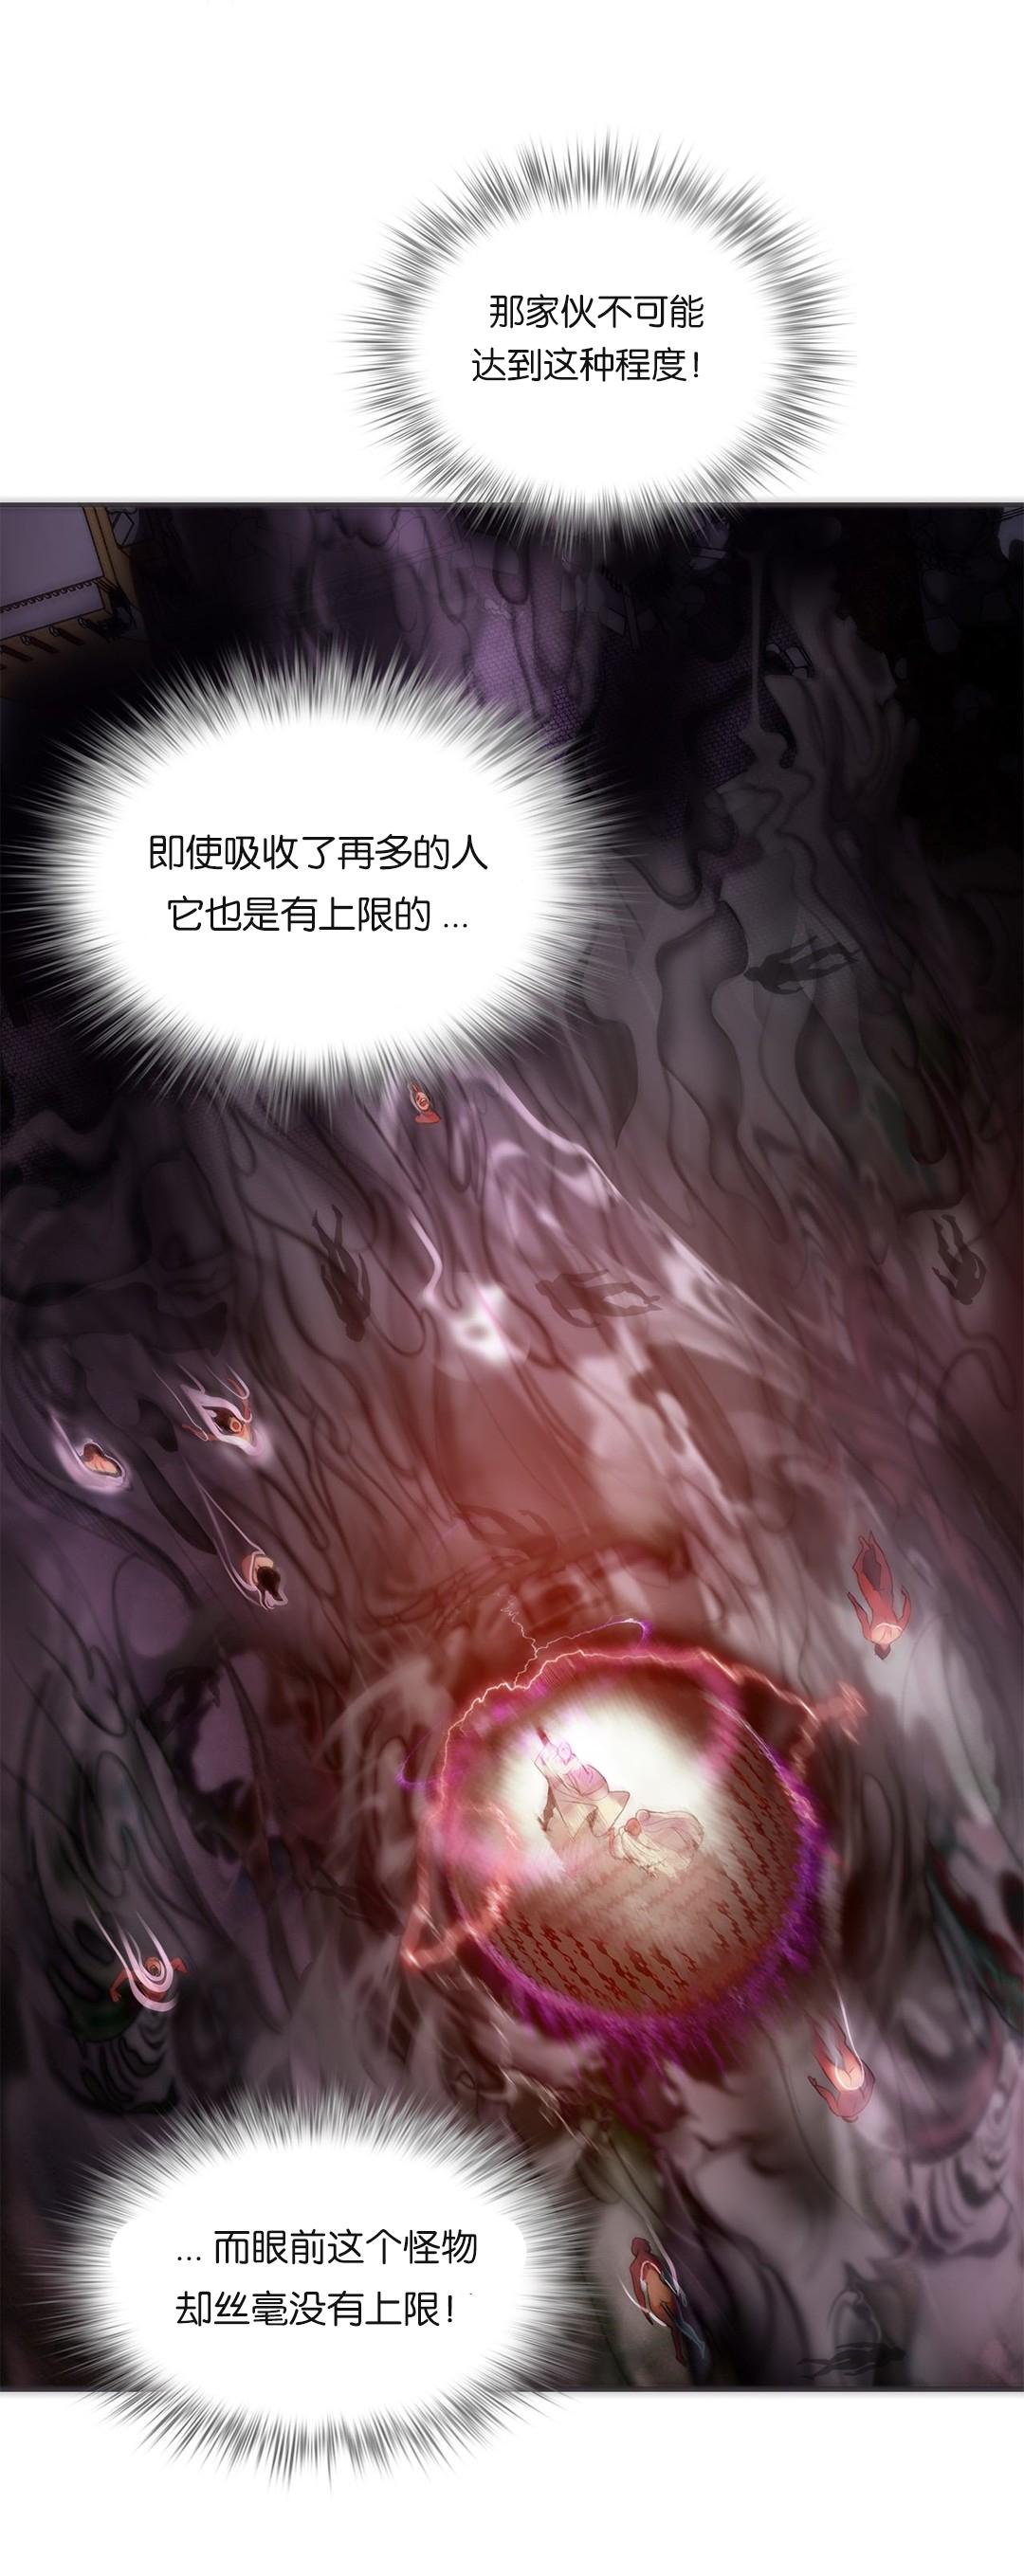 [Juder] Lilith`s Cord (第二季) Ch.61-68 [Chinese] [aaatwist个人汉化] [Ongoing] 21